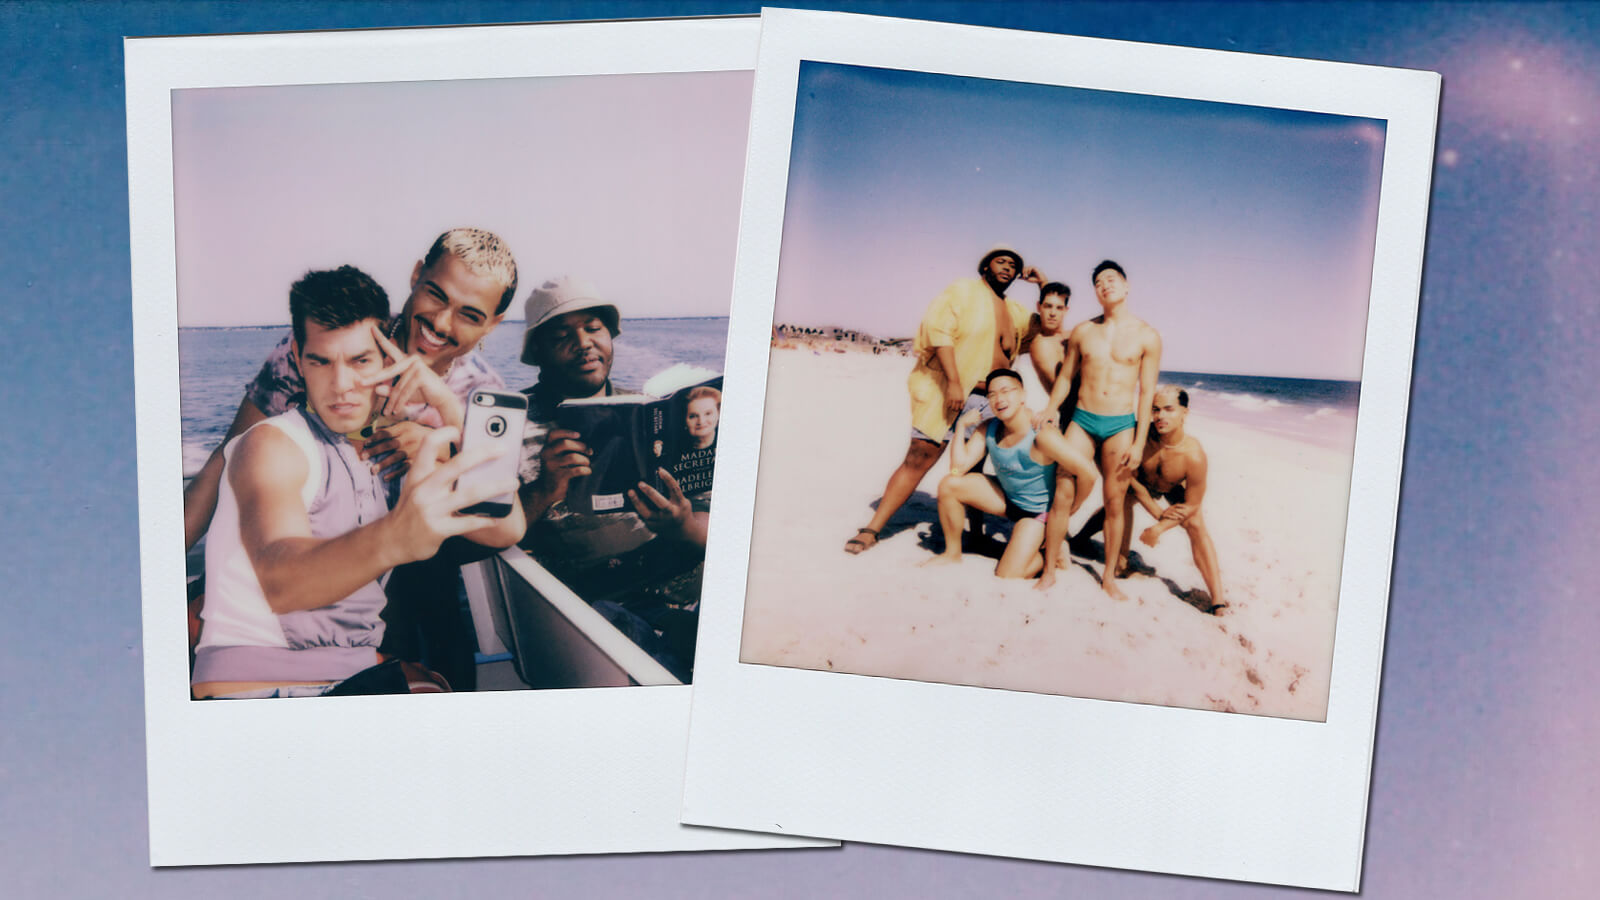 Polaroids of characters from the movie Fire Island